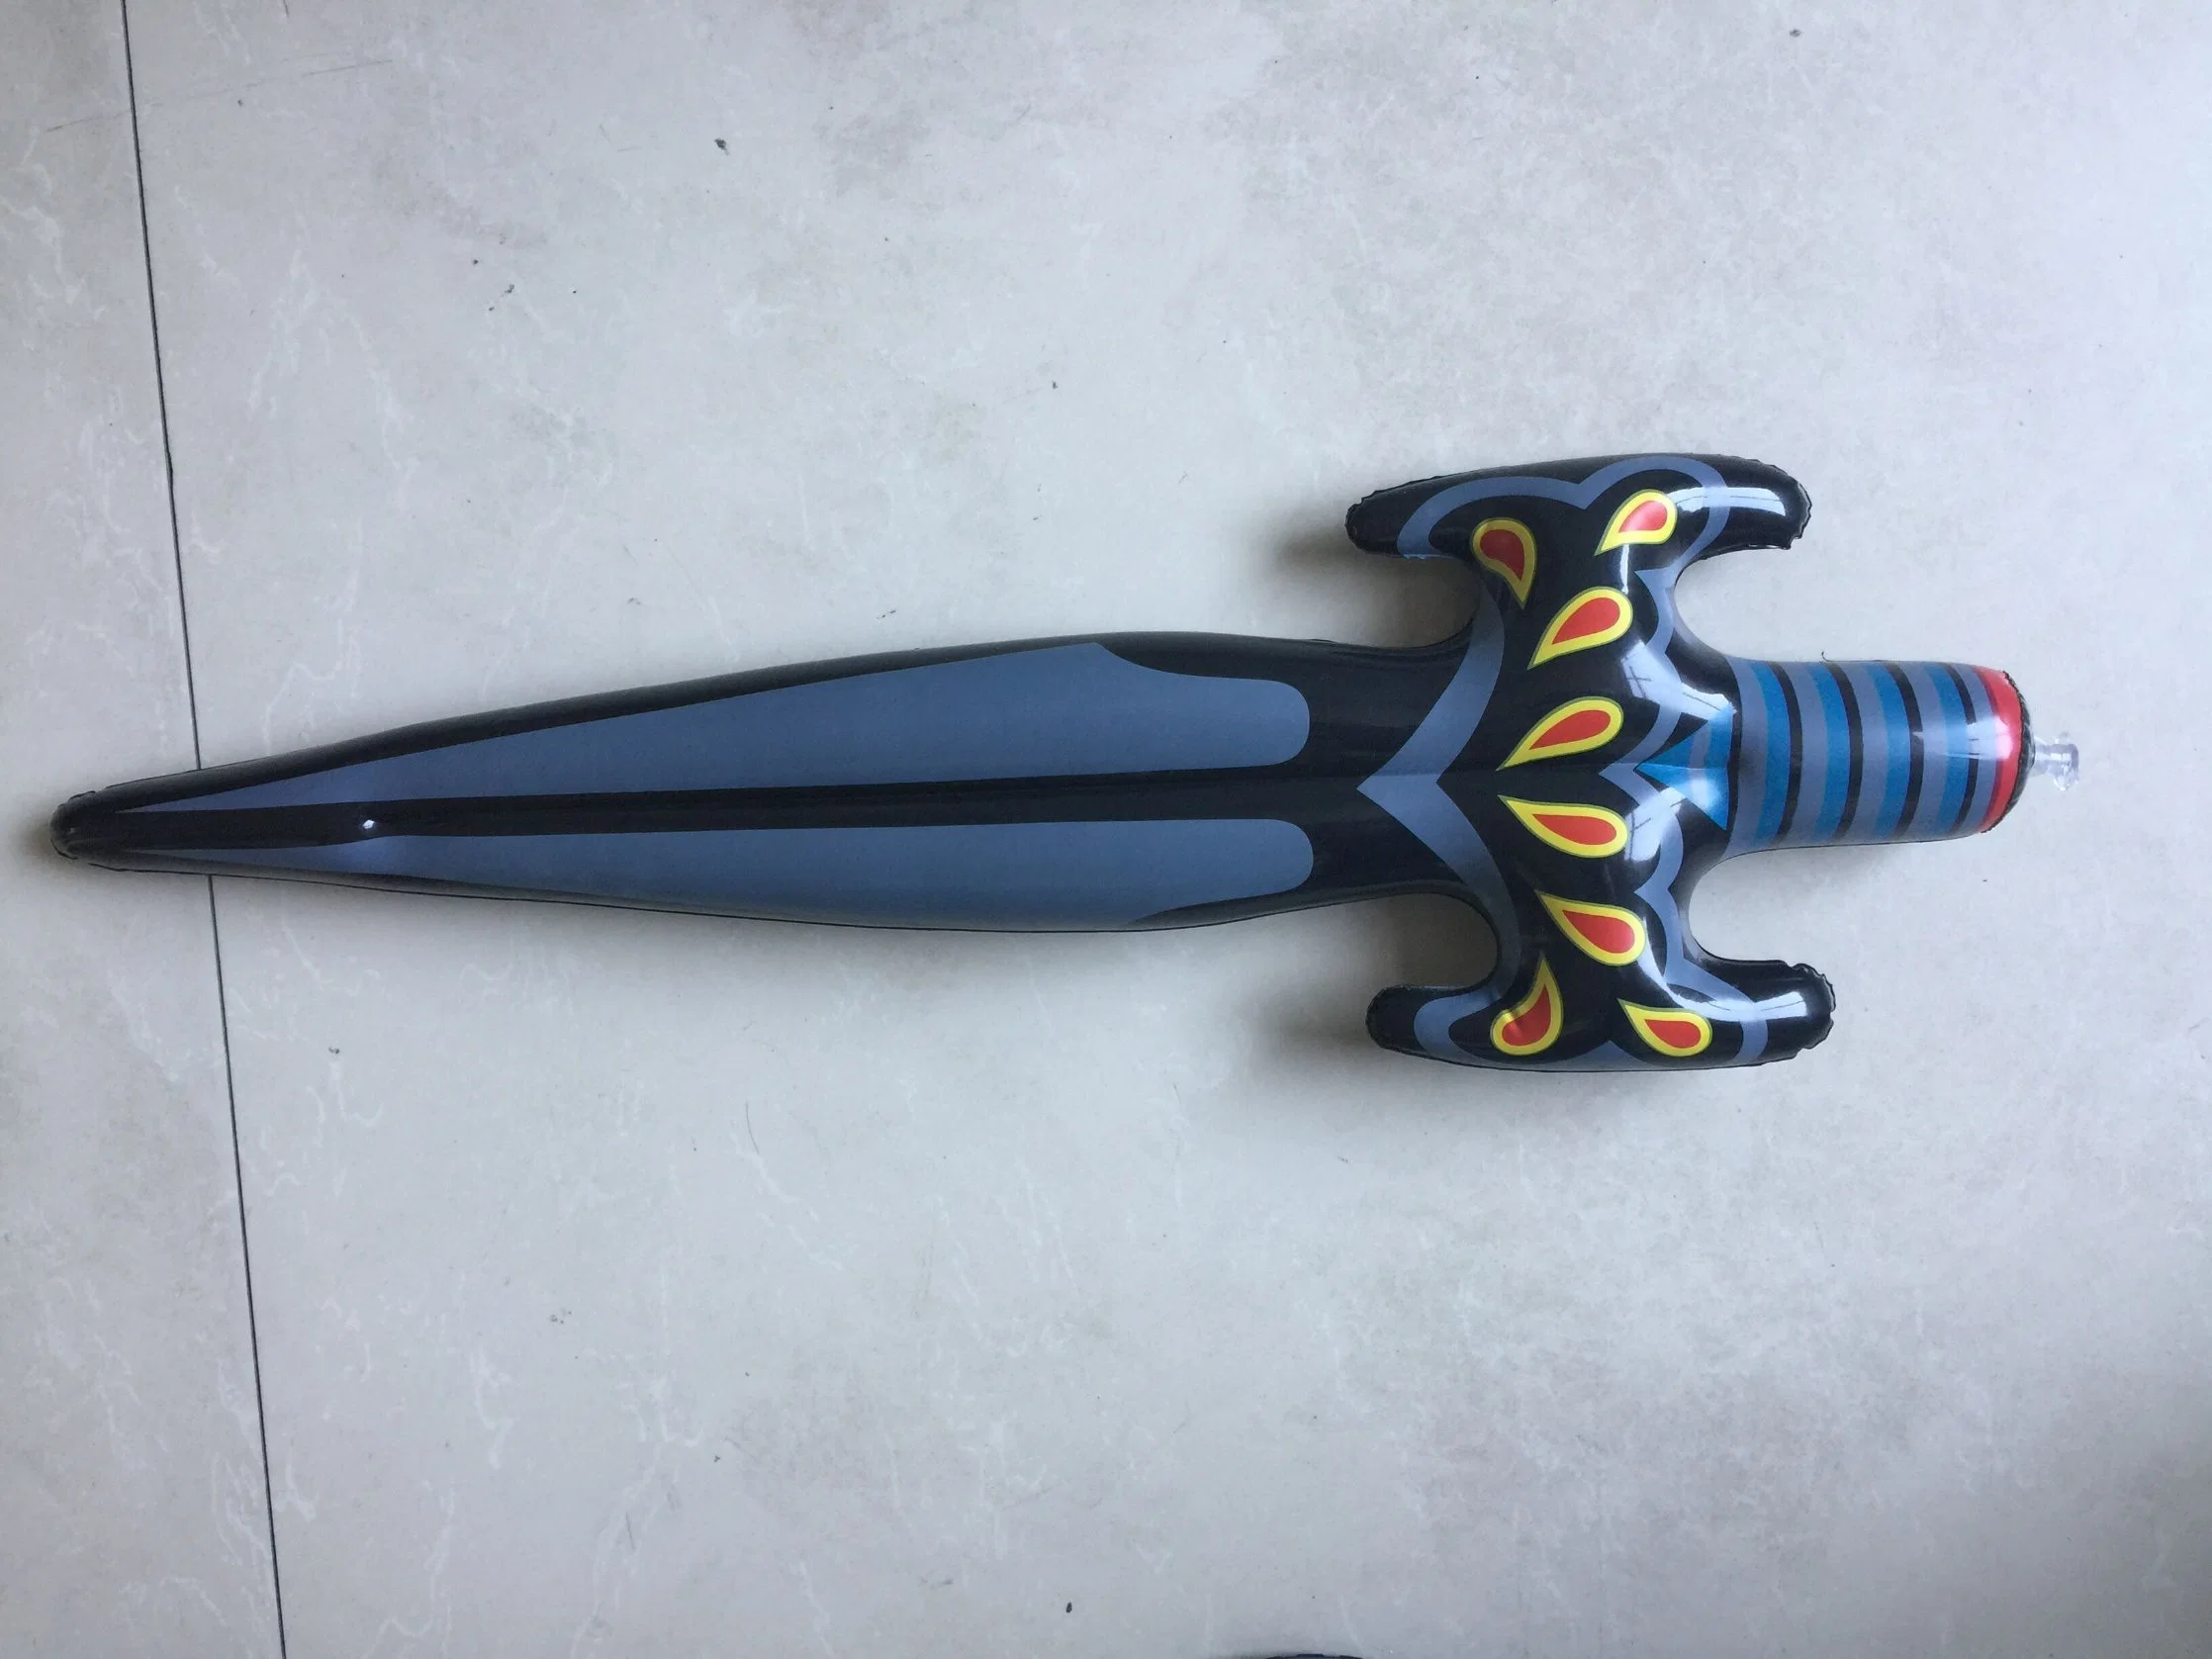 Cheap Toy Inflatable PVC Sword Falchion Kids Children Play Gifts